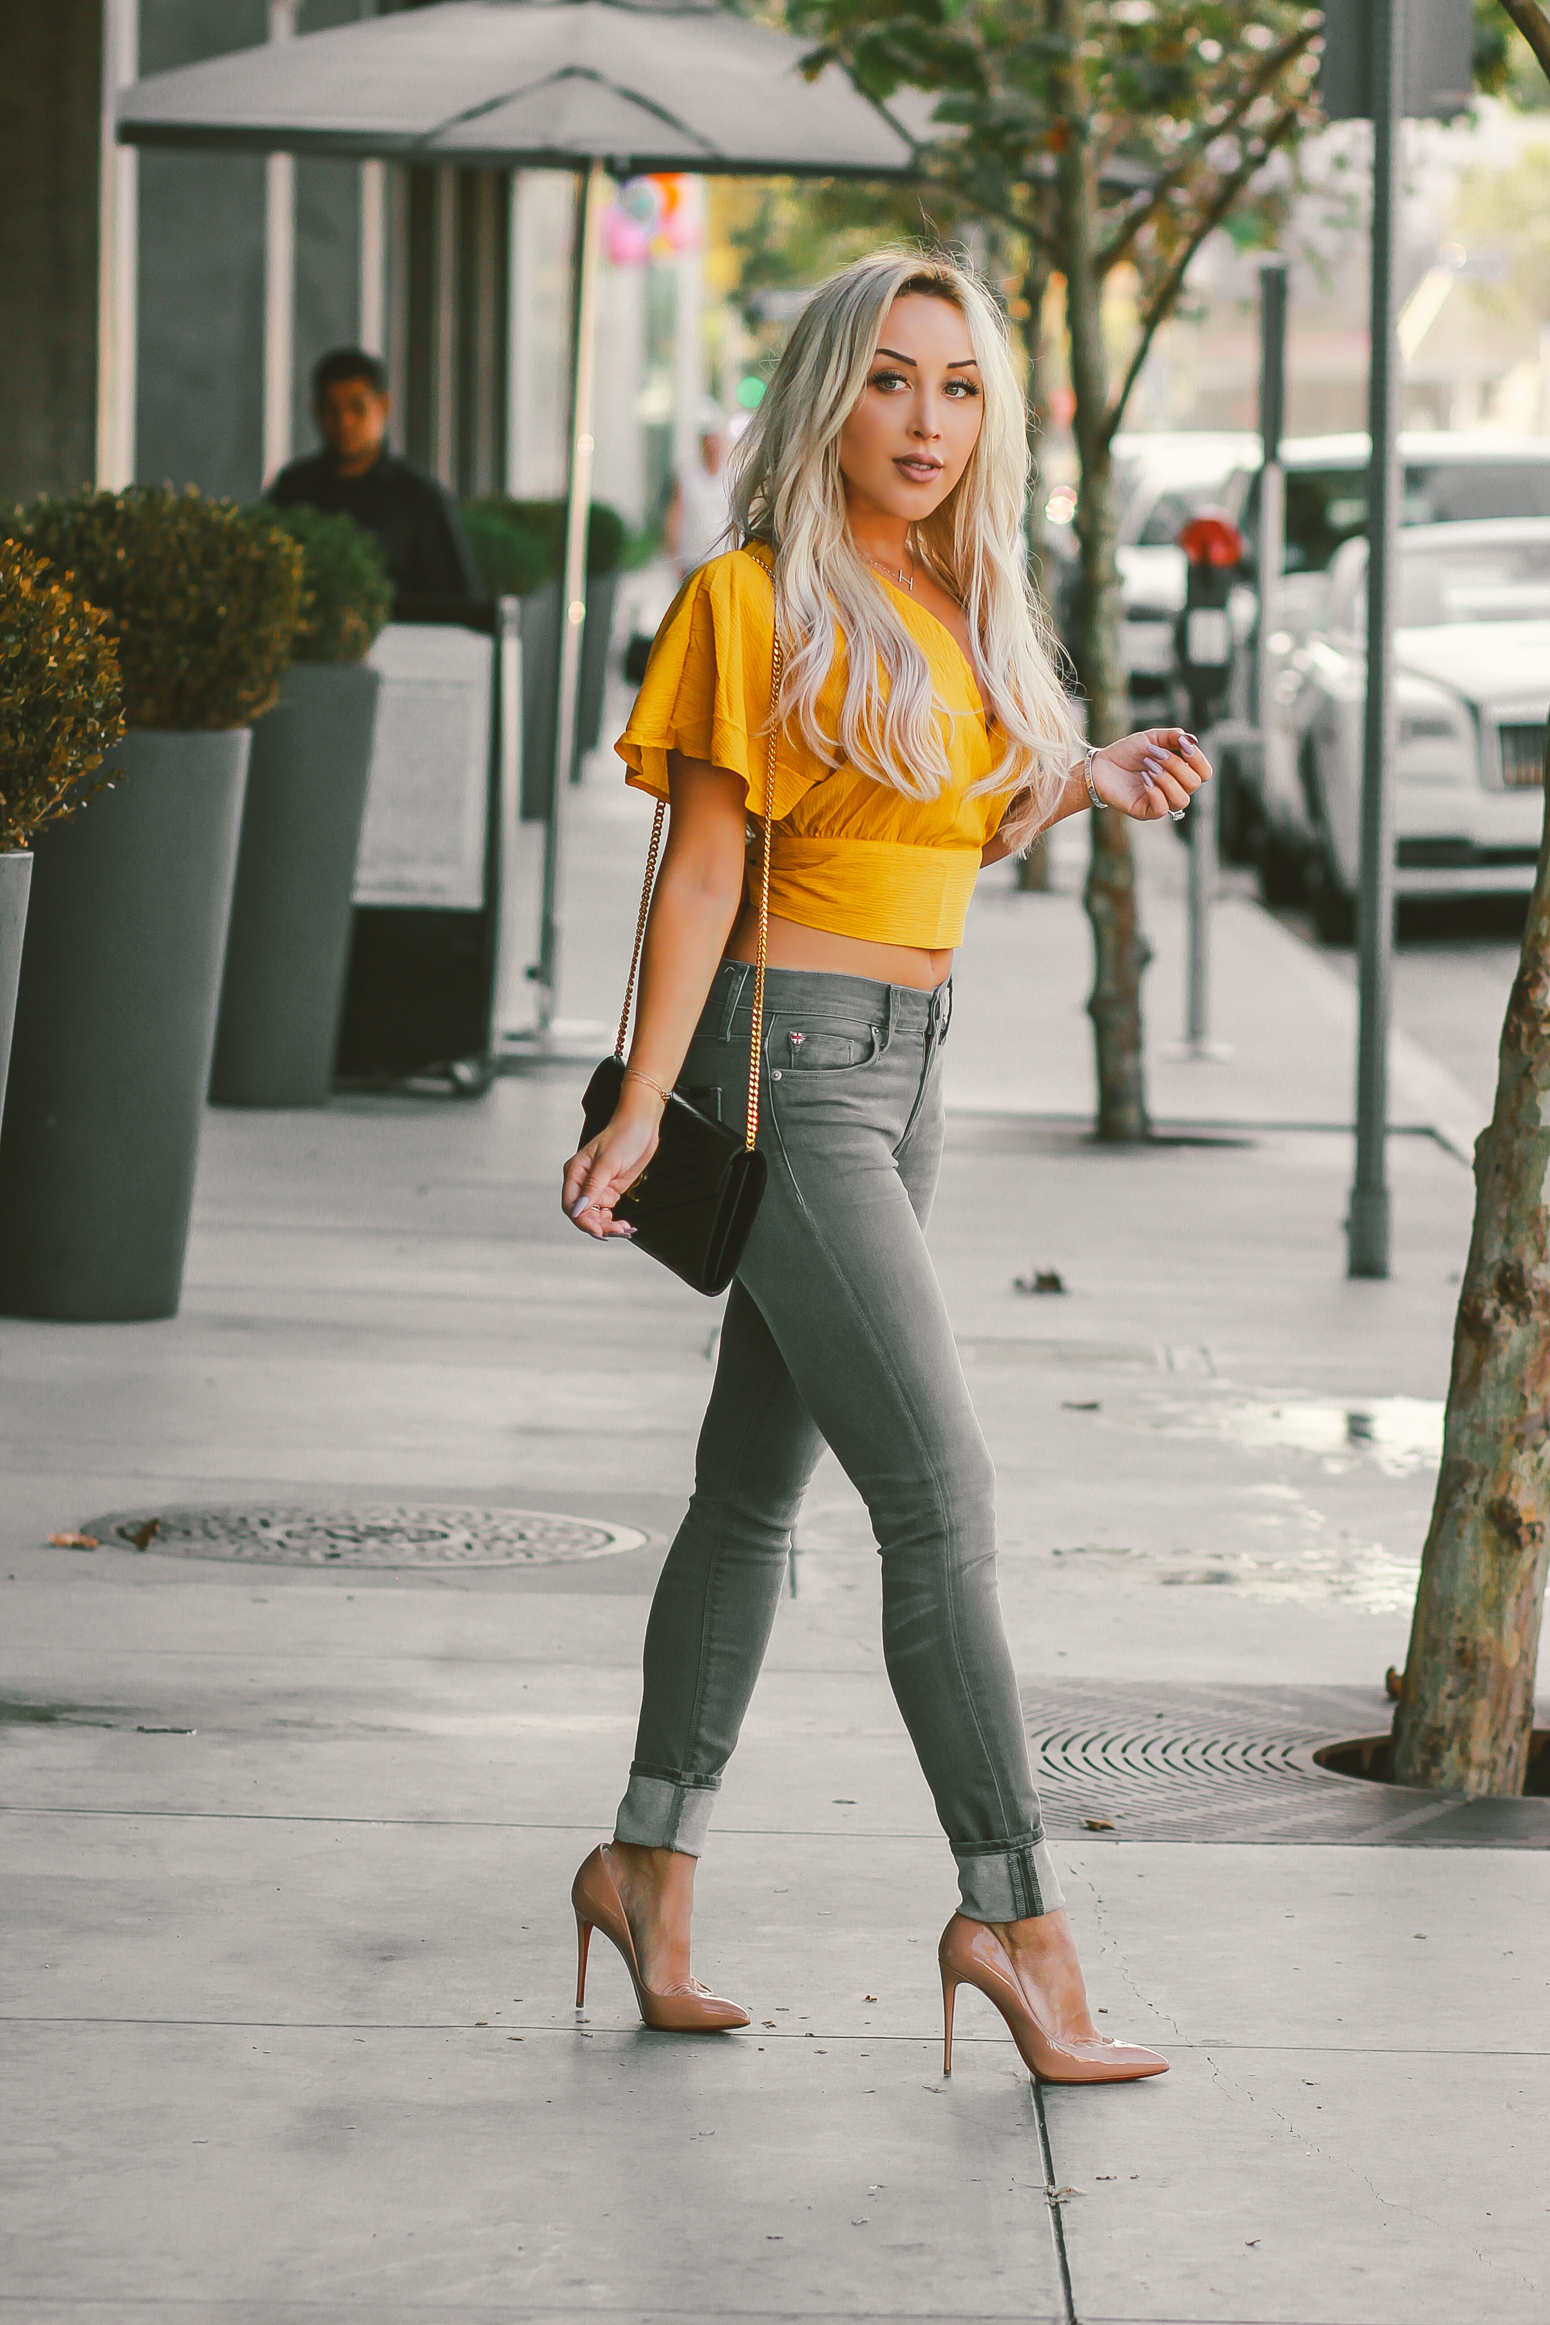 Blondie in the City | My Perfect Grey Jeans | Fall Fashion Inspo | Grey Hudson Jeans, Yellow Flowy Top | Black YSL | Nude Louboutin's